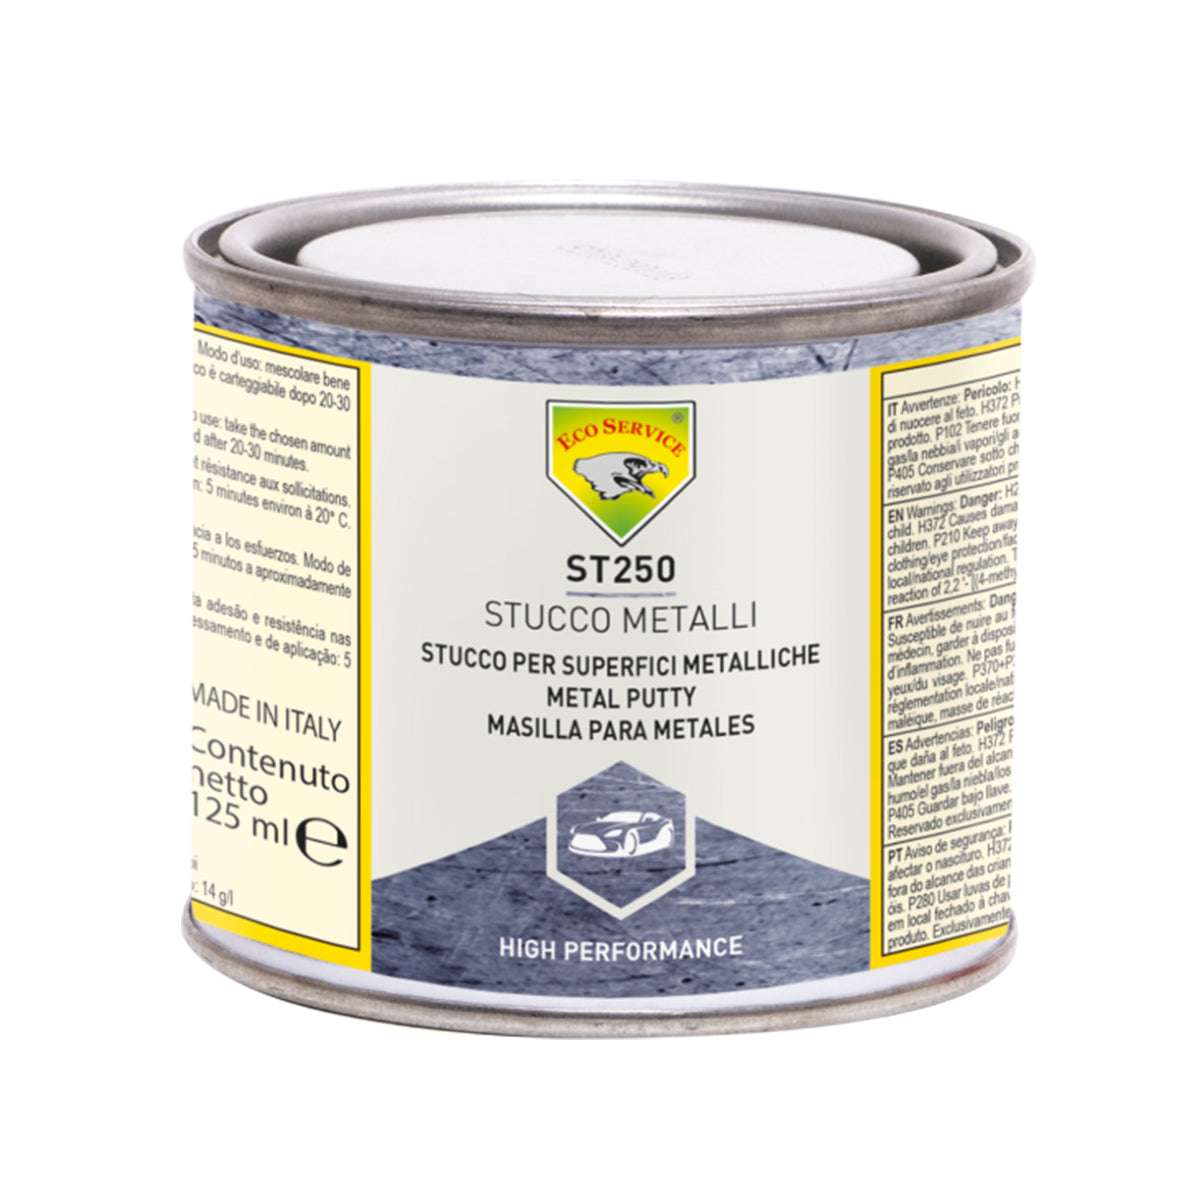 Metal putty 125ml for repairing sheet metal, aluminum and galvanized surfaces